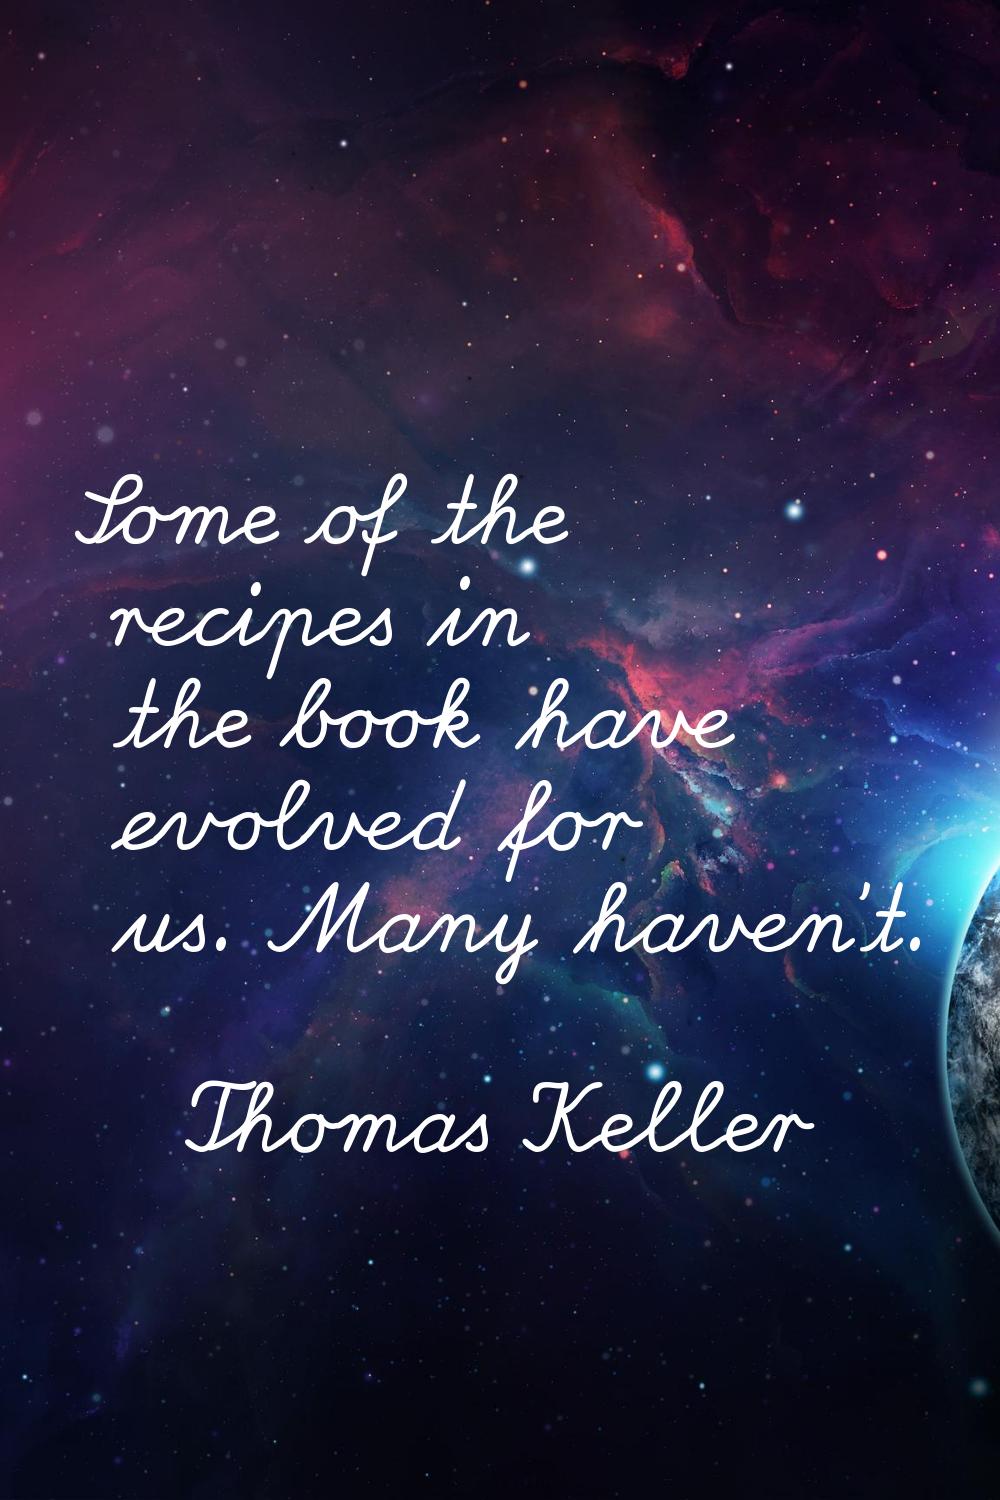 Some of the recipes in the book have evolved for us. Many haven't.